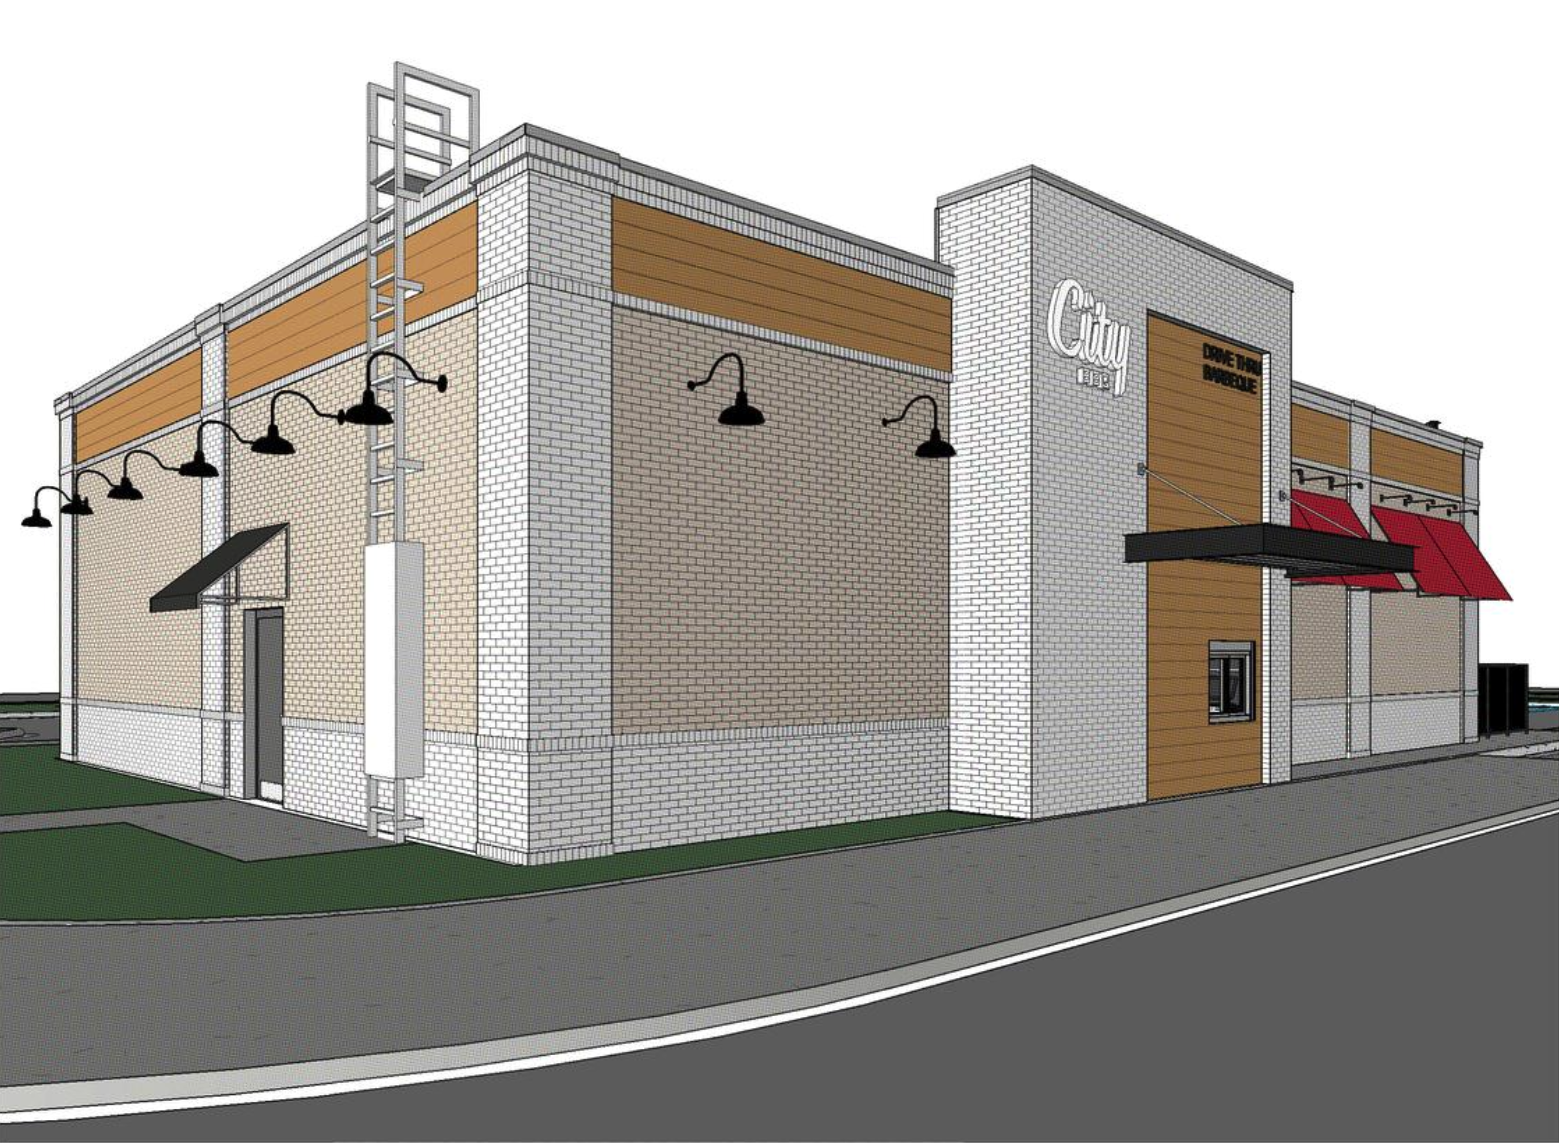 Snellville City Barbeque To Offer Drive-Thru, Plans Show - Rendering 1